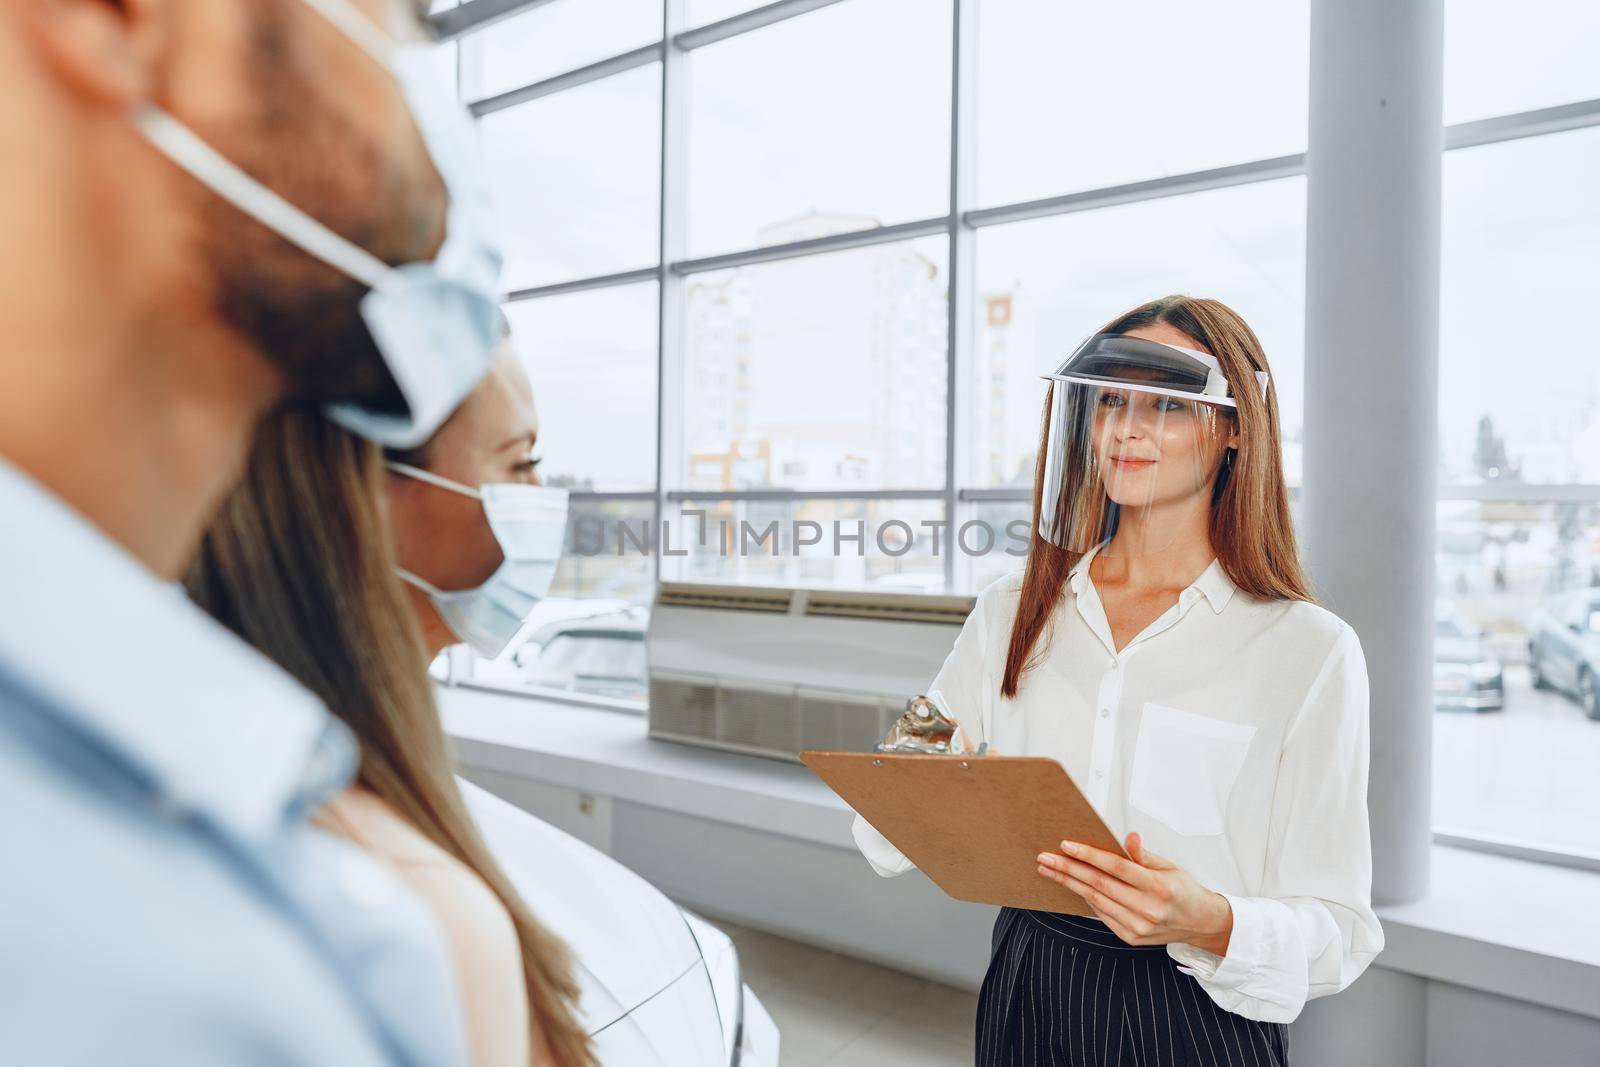 Woman car dealer consulting buyers wearing medical face shield. Coronavirus job requirements concept